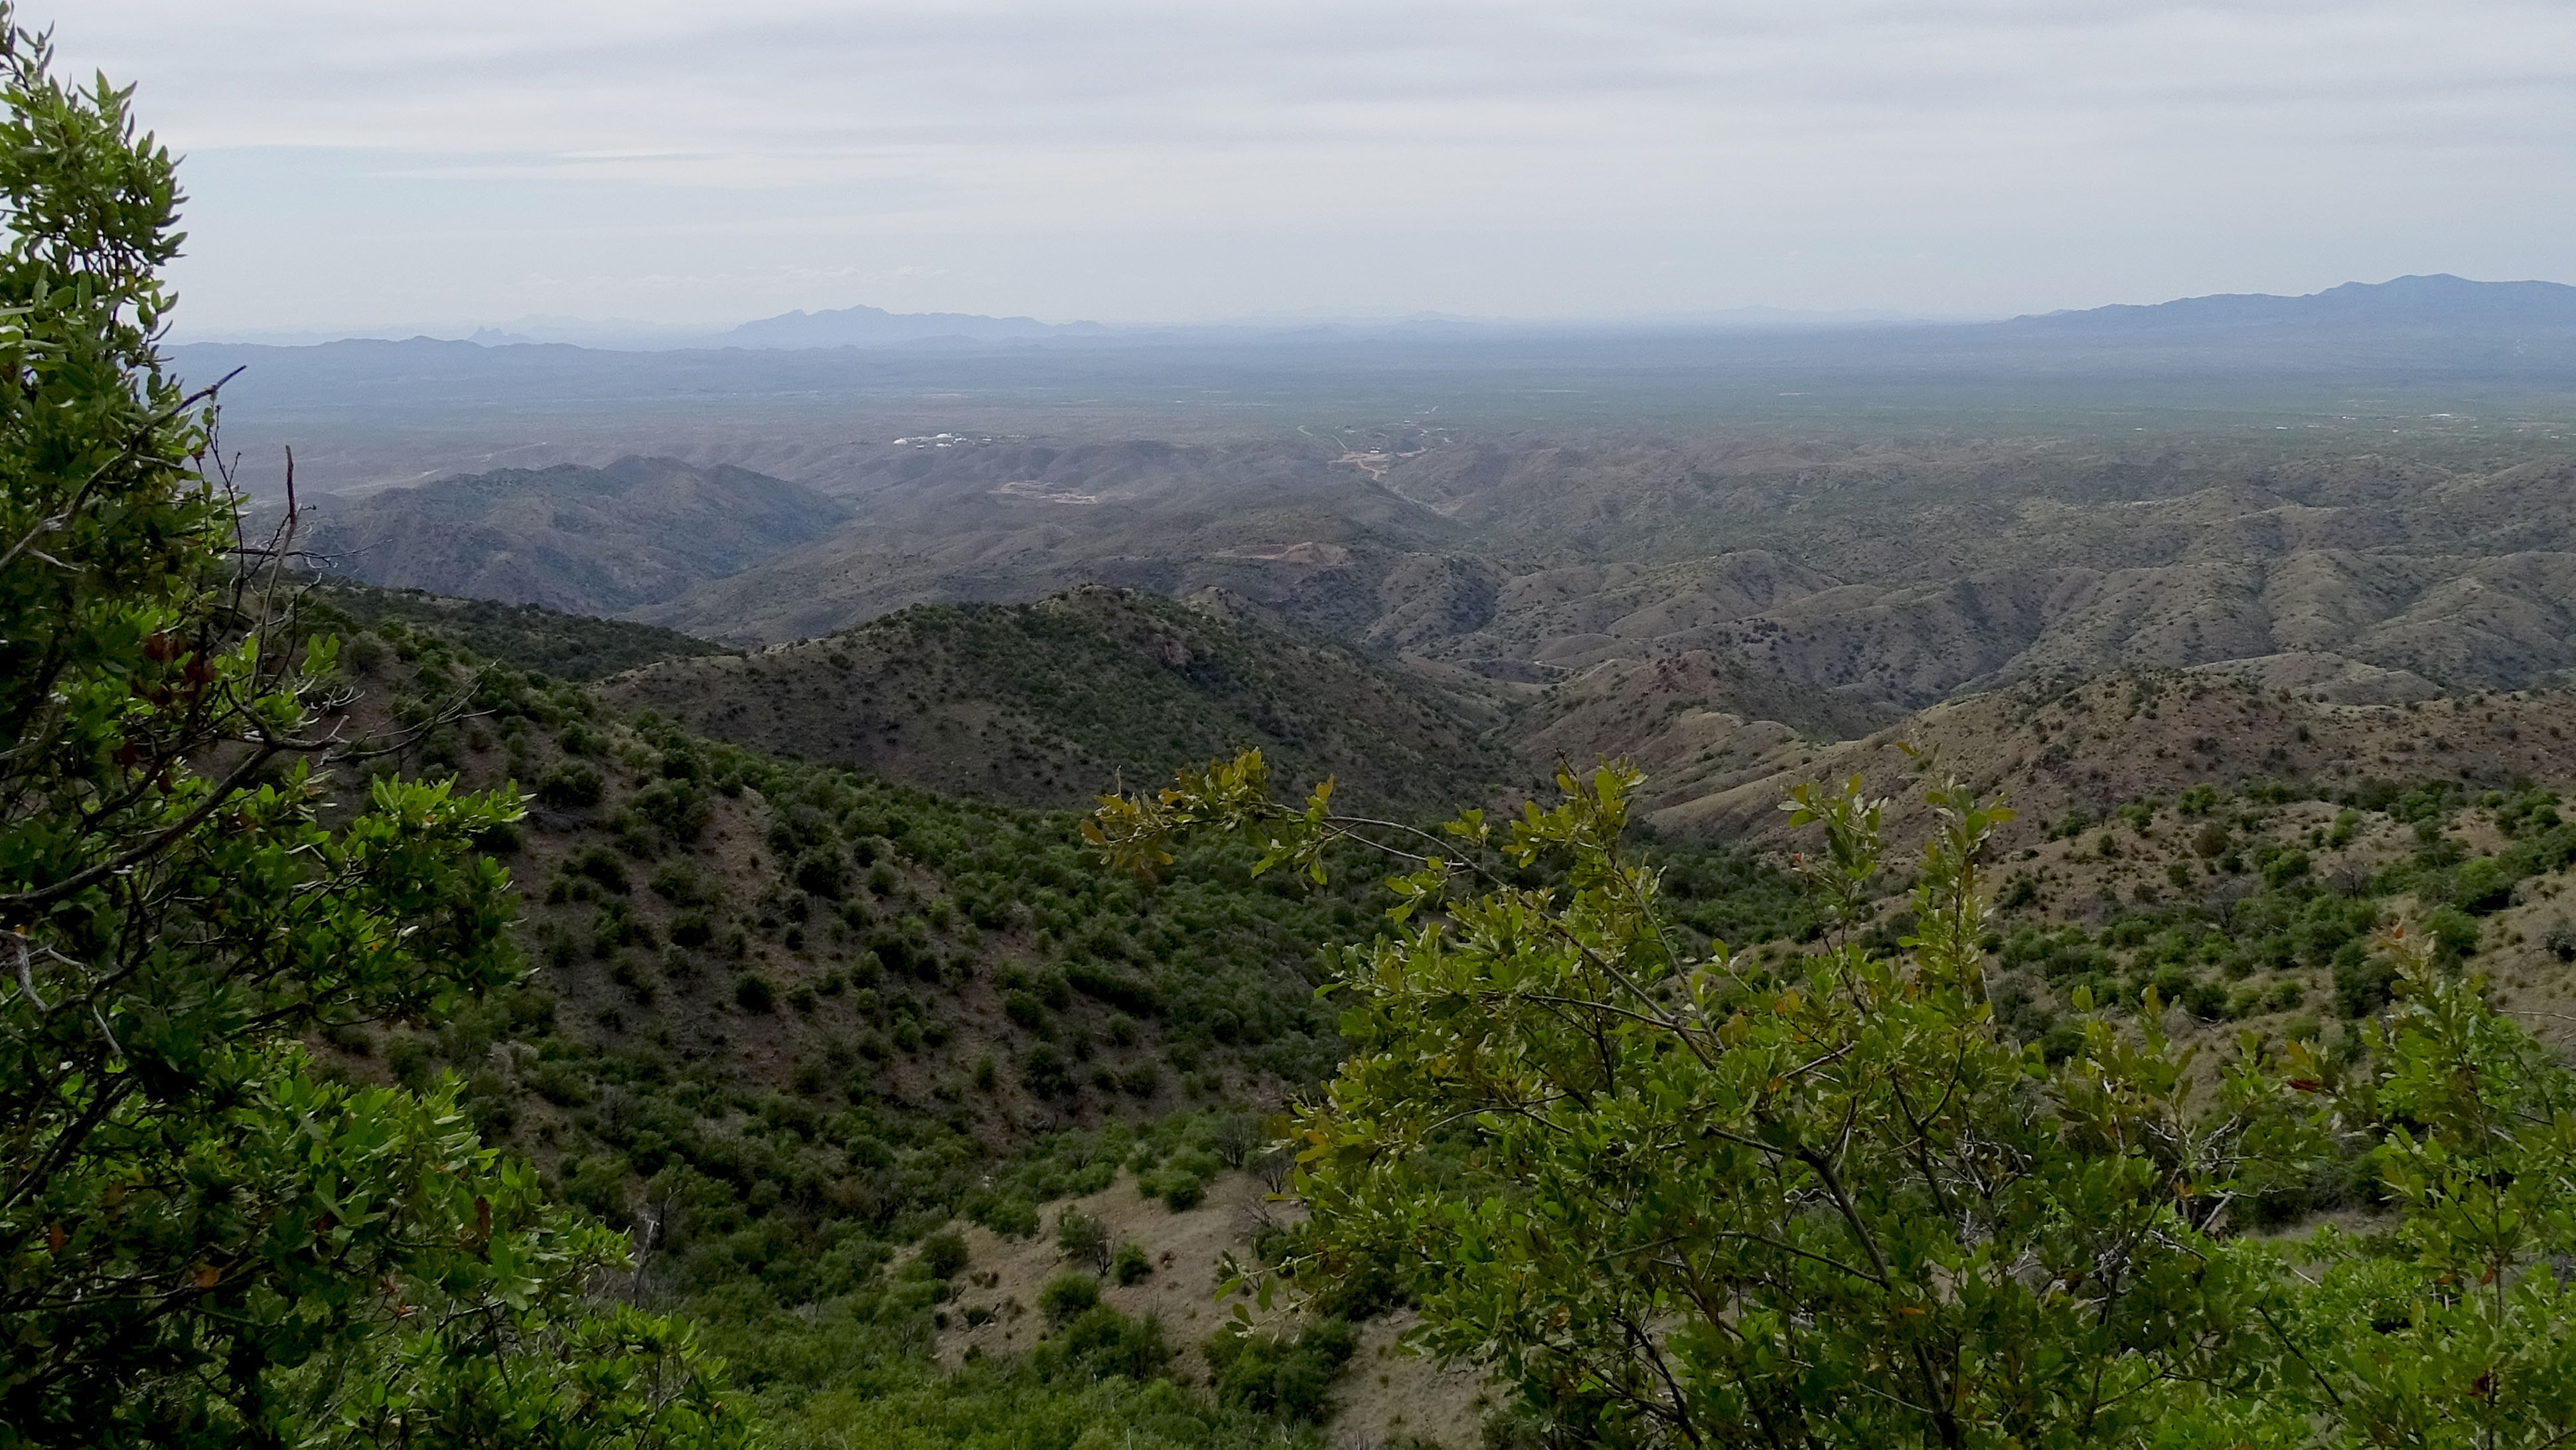 The view from the Oracle Ridge Trail looking north. The landscape would have been much the same as what Sara Lemmon saw on her journey up the mountain, except of course Biosphere II would not have been in the background.